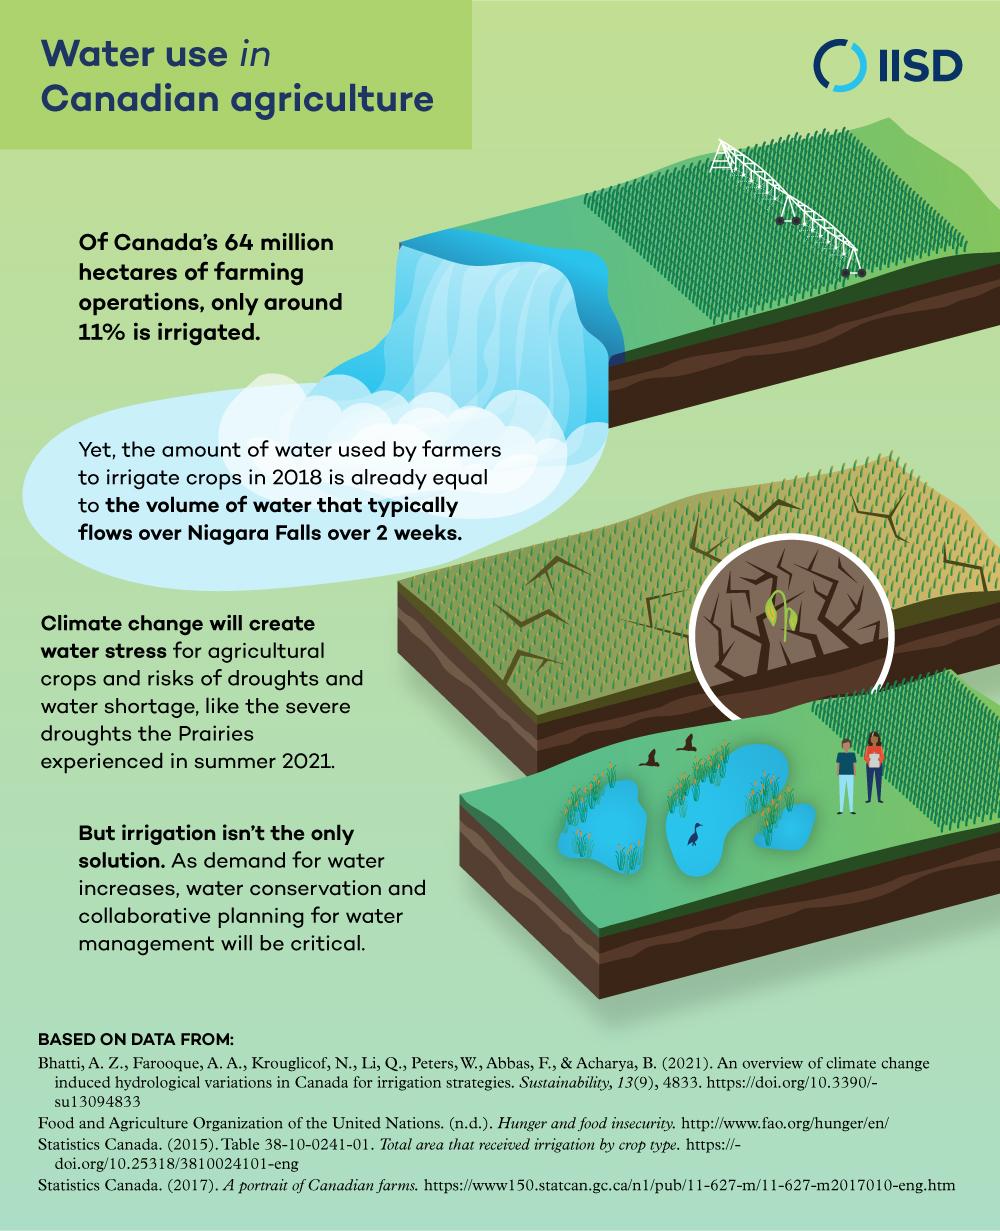 Infographic on water use in Canadian agriculture